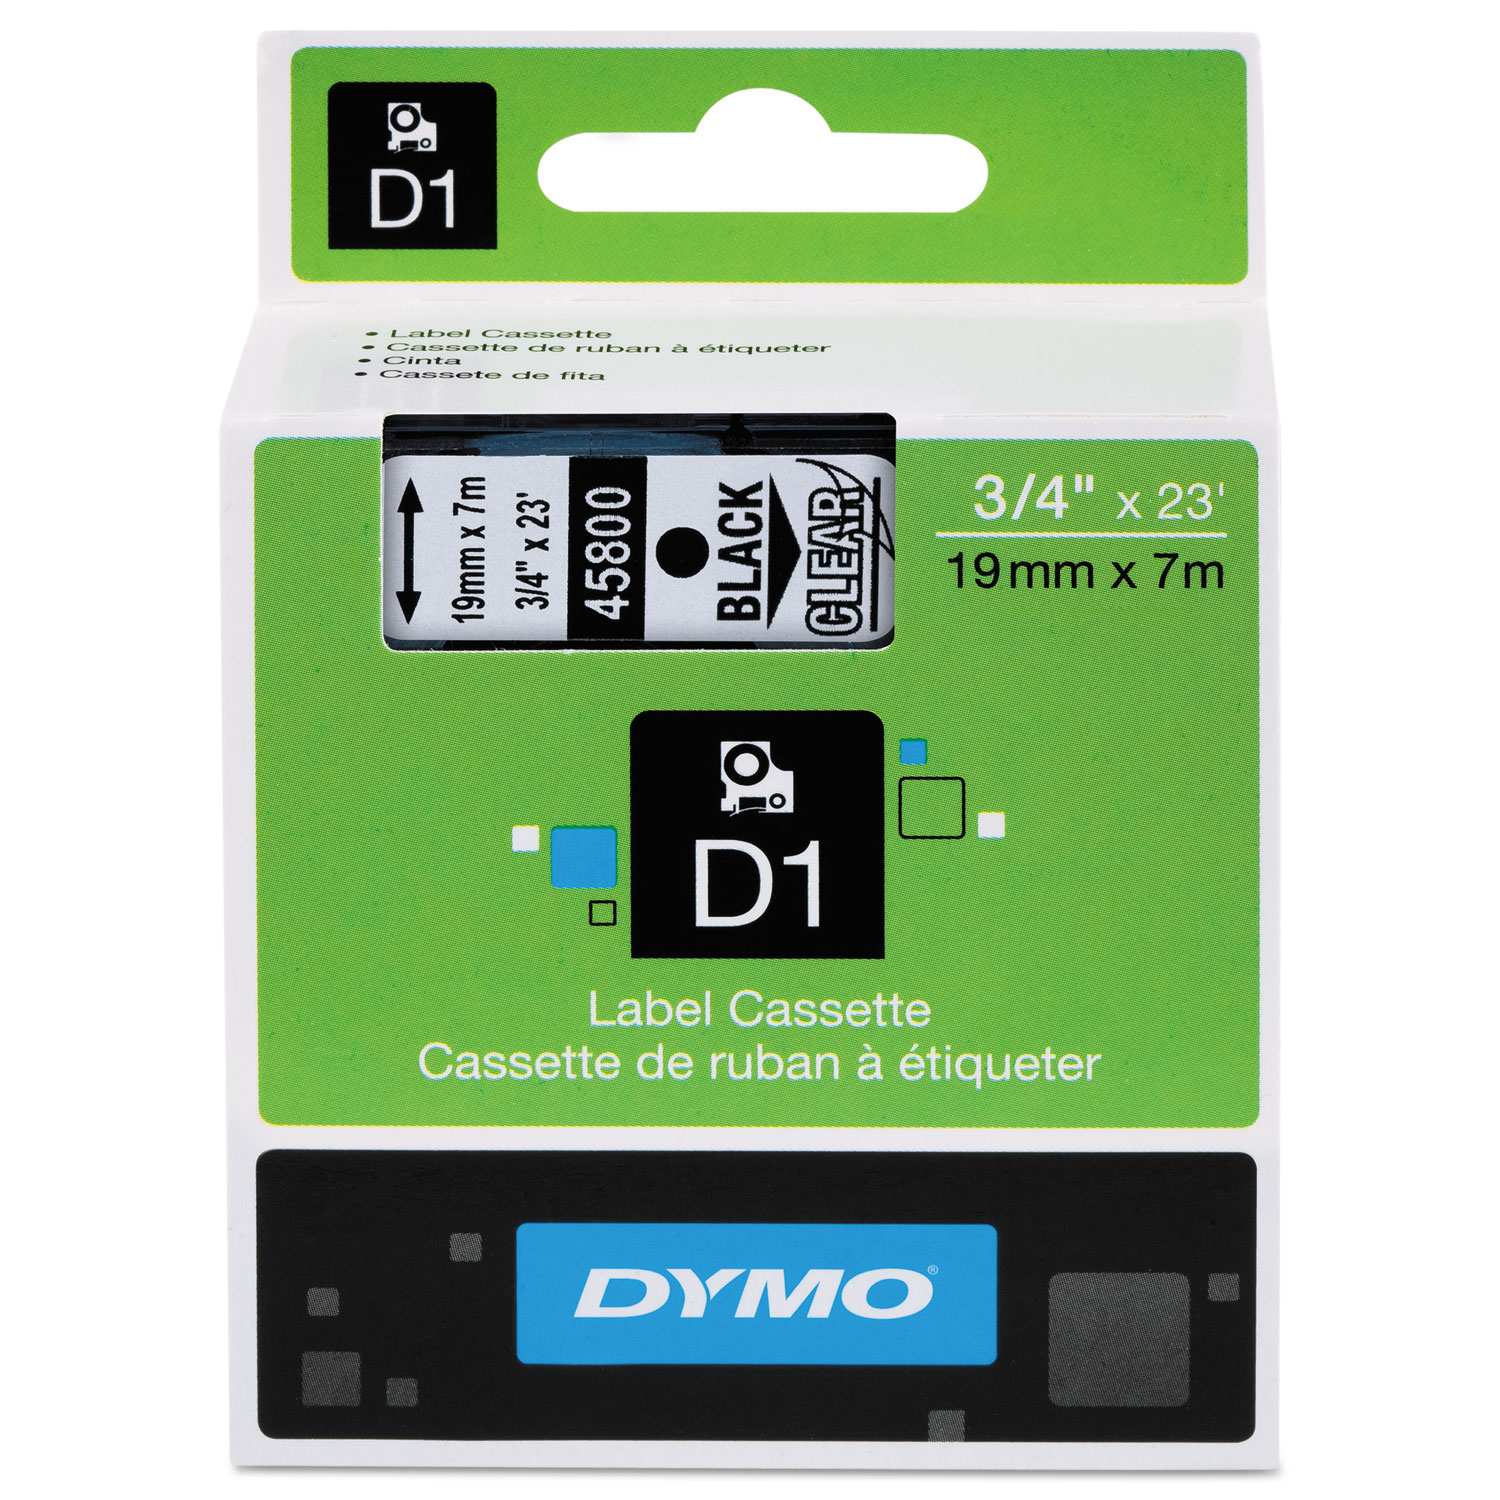 D1 High-Performance Polyester Removable Label Tape, 3/4 x 23 ft, Black on Clear